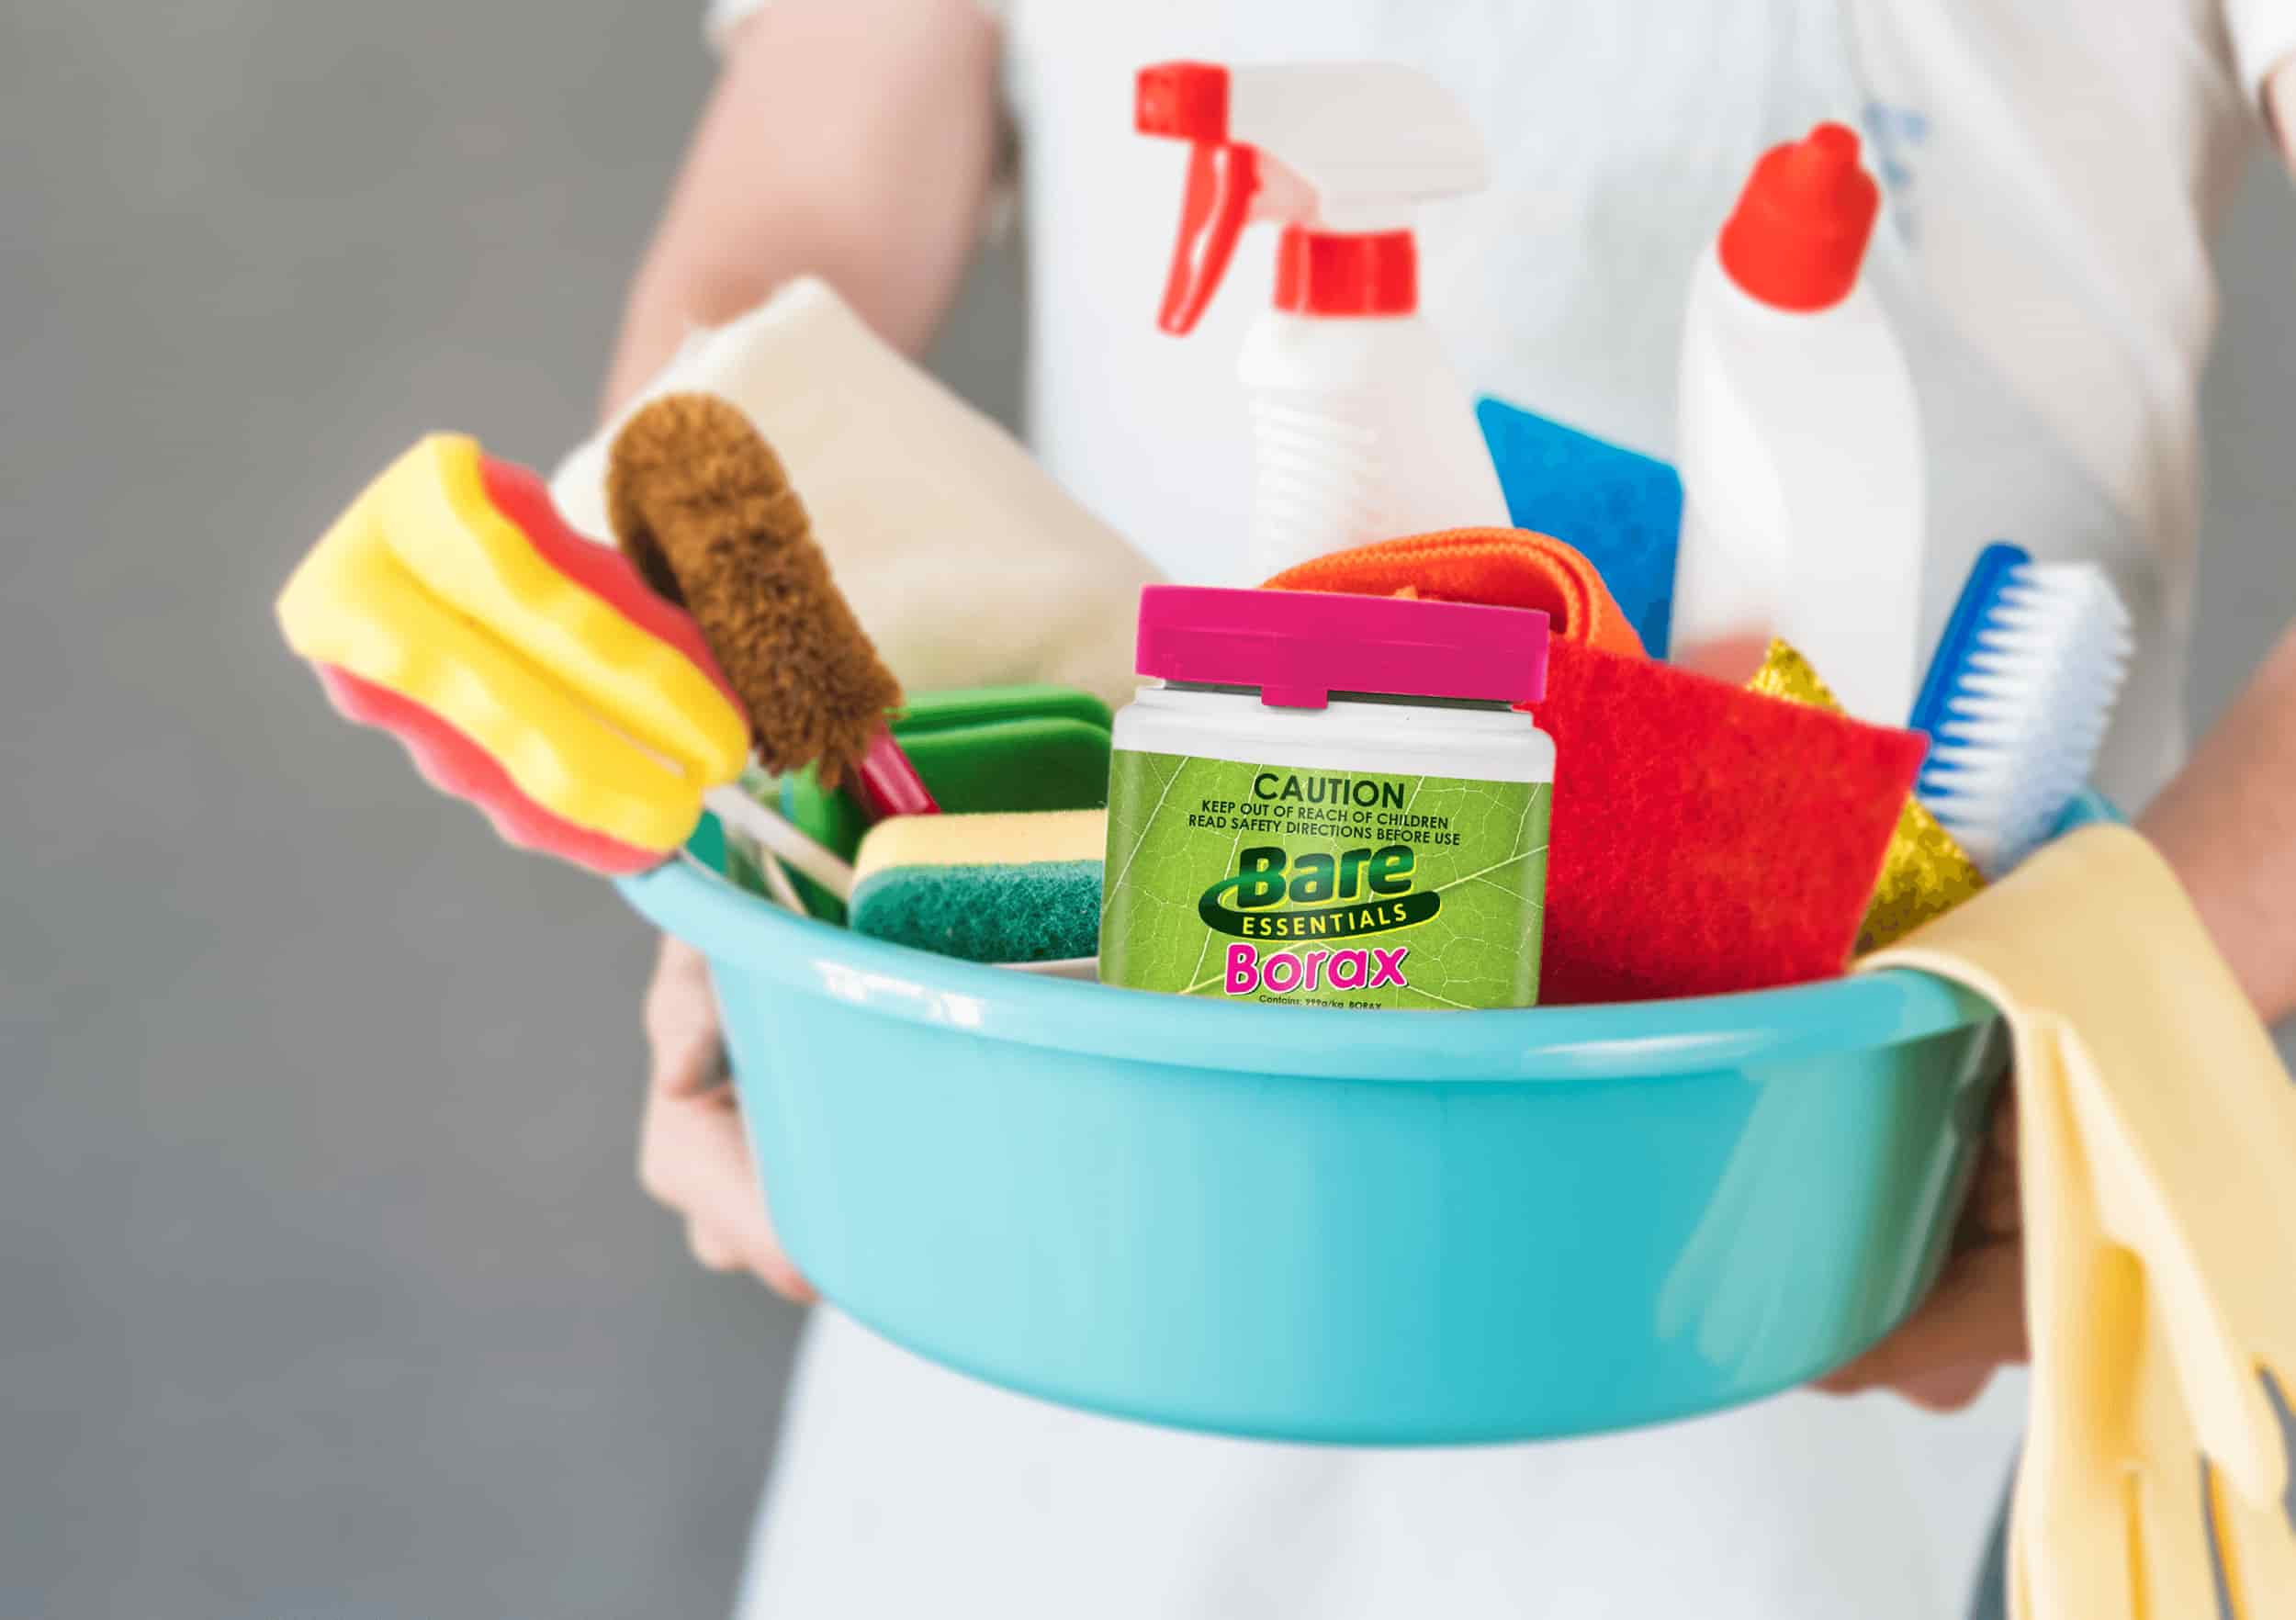 The Crucial Facts About Cleaning With Borax